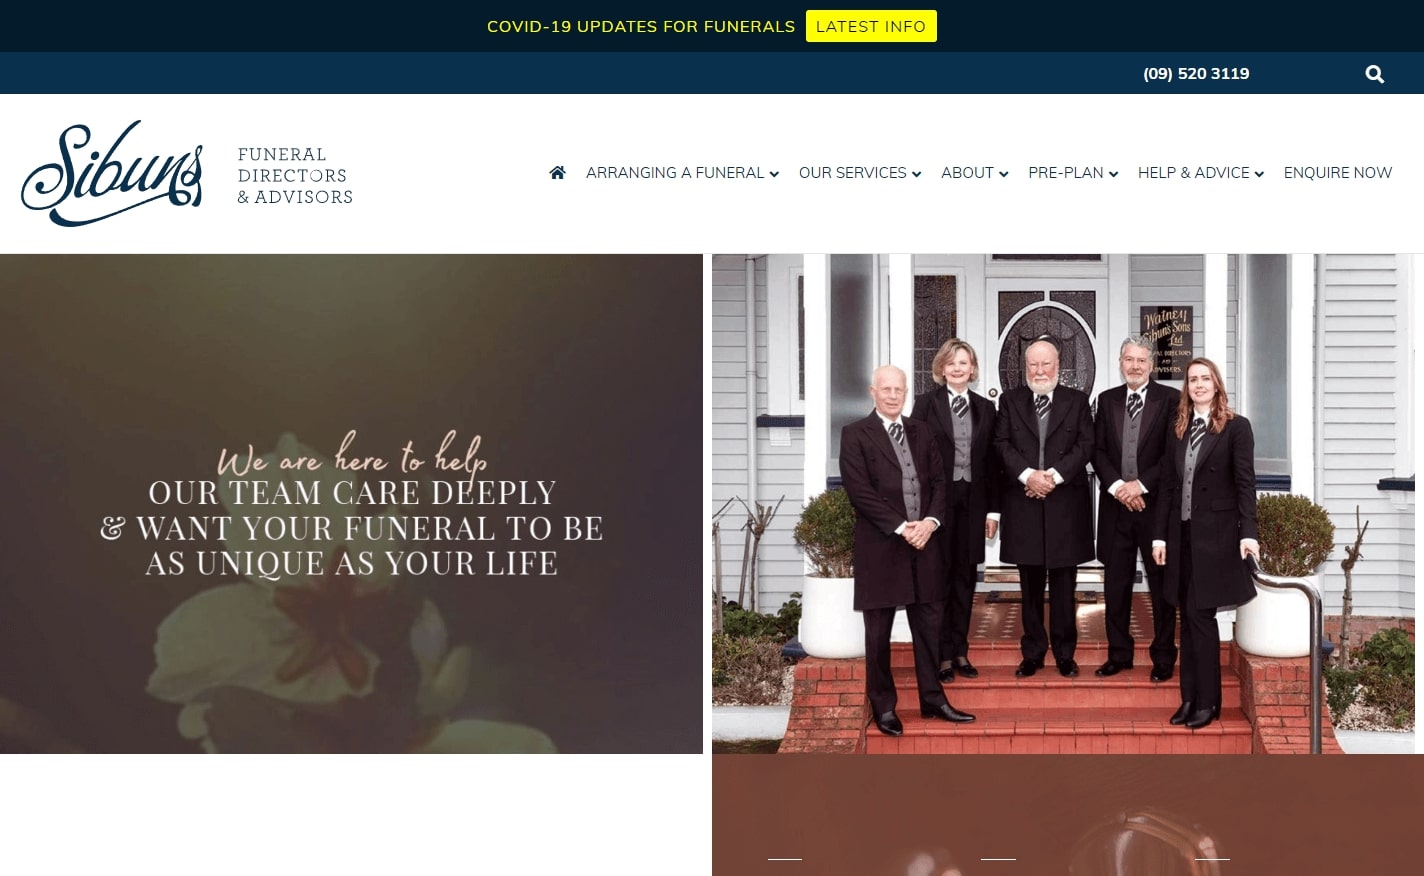 Design for Funeral